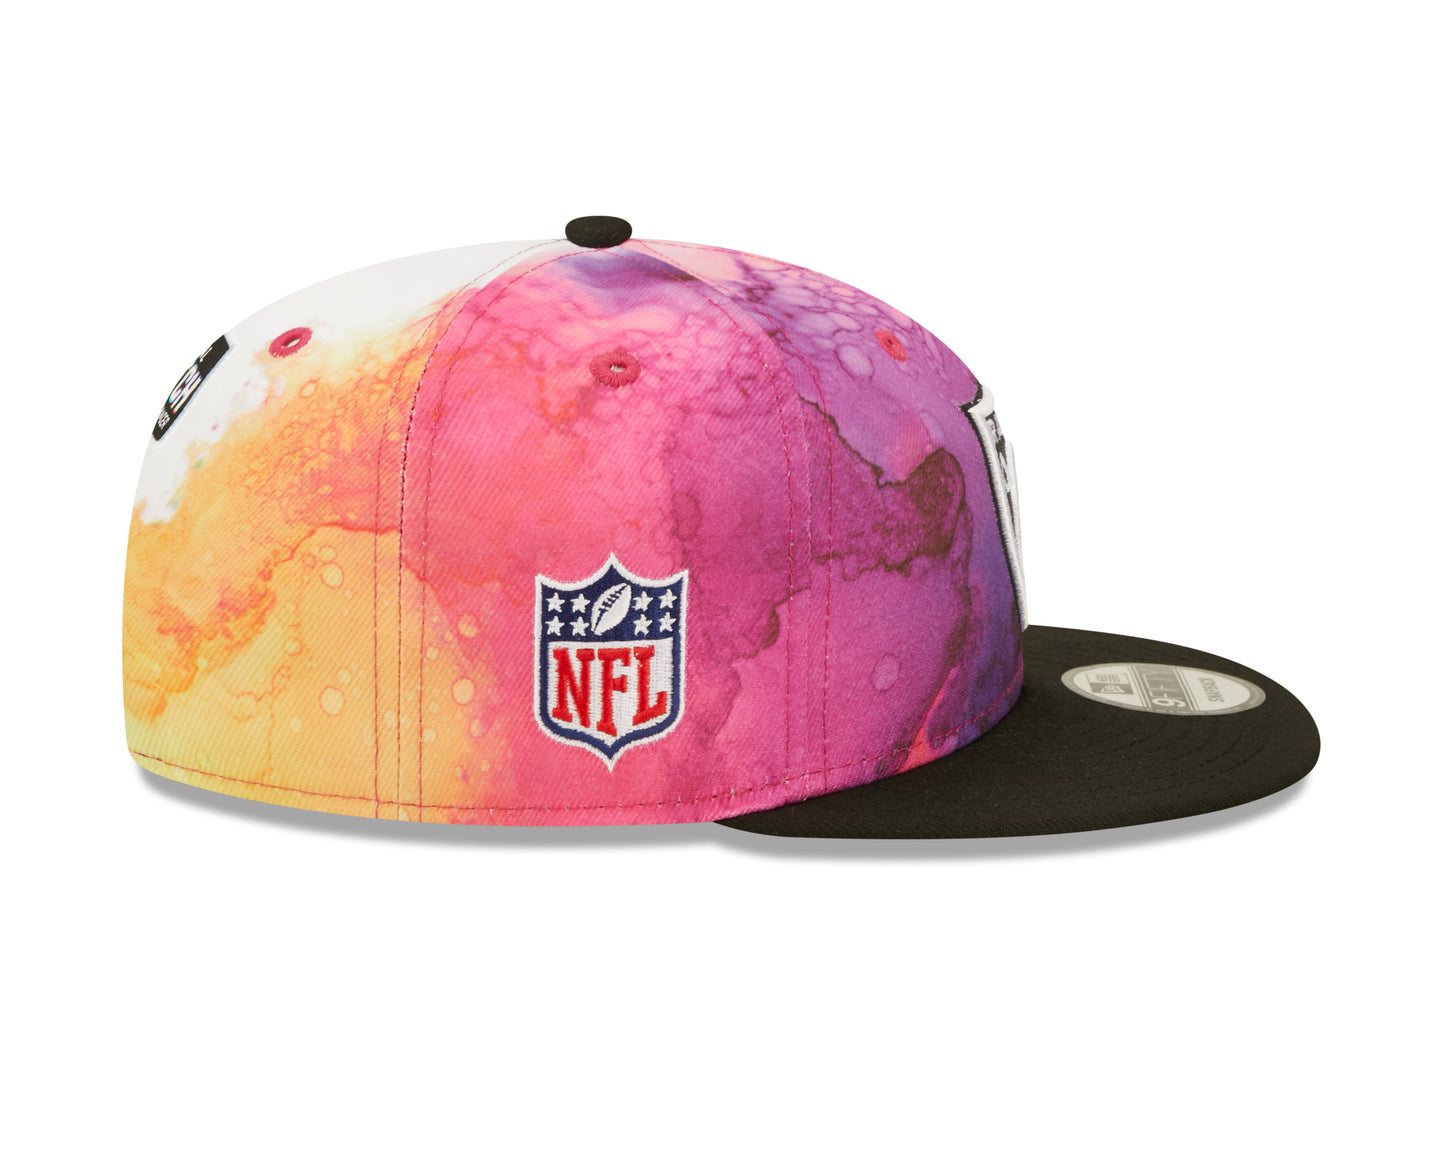 Las Vegas Raiders New Era Sideline Crucial Catch 9Fifty Hat- Ink Pink